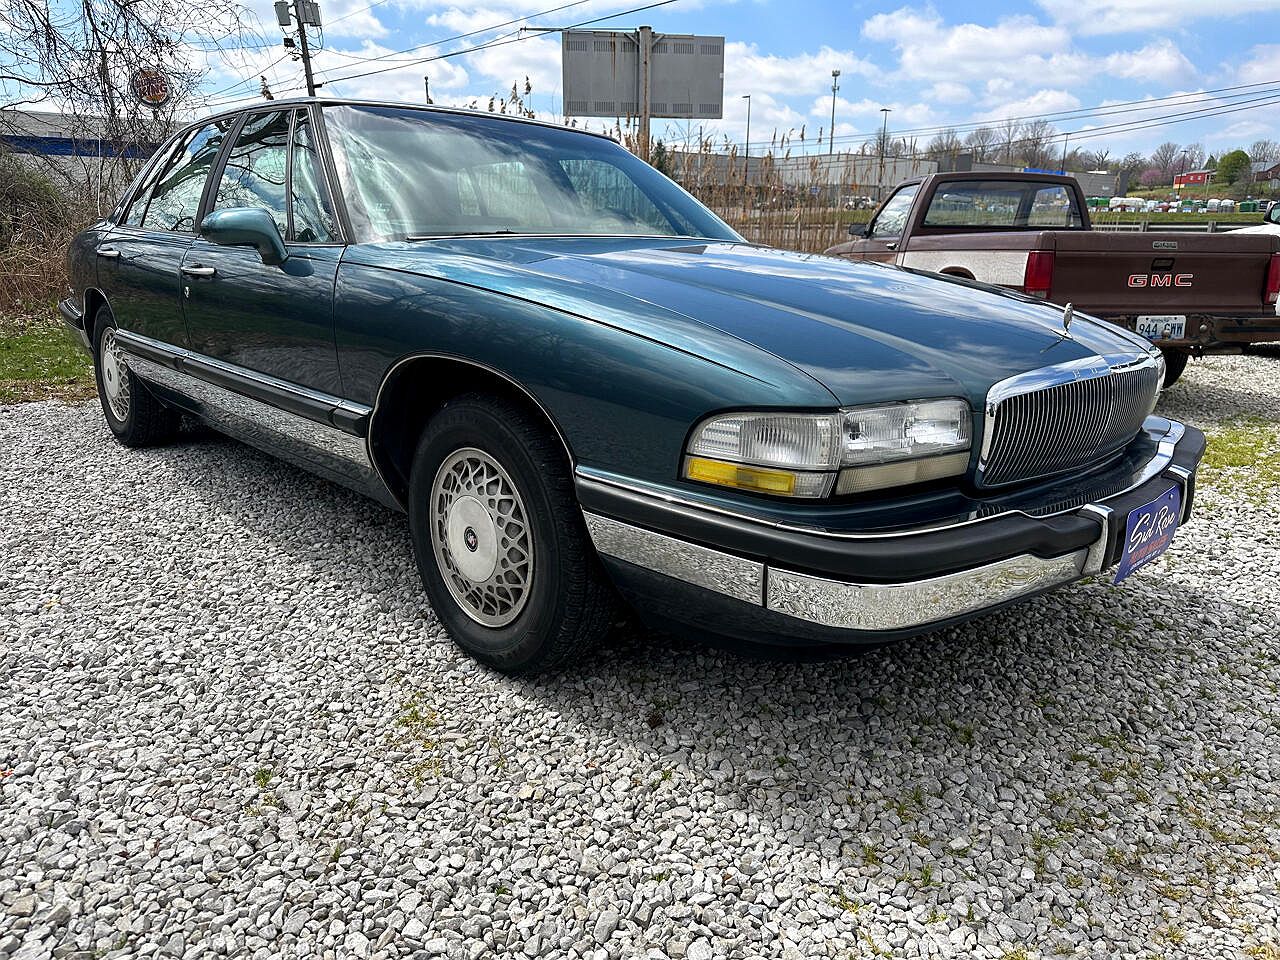 1993 Buick Park Avenue null image 1